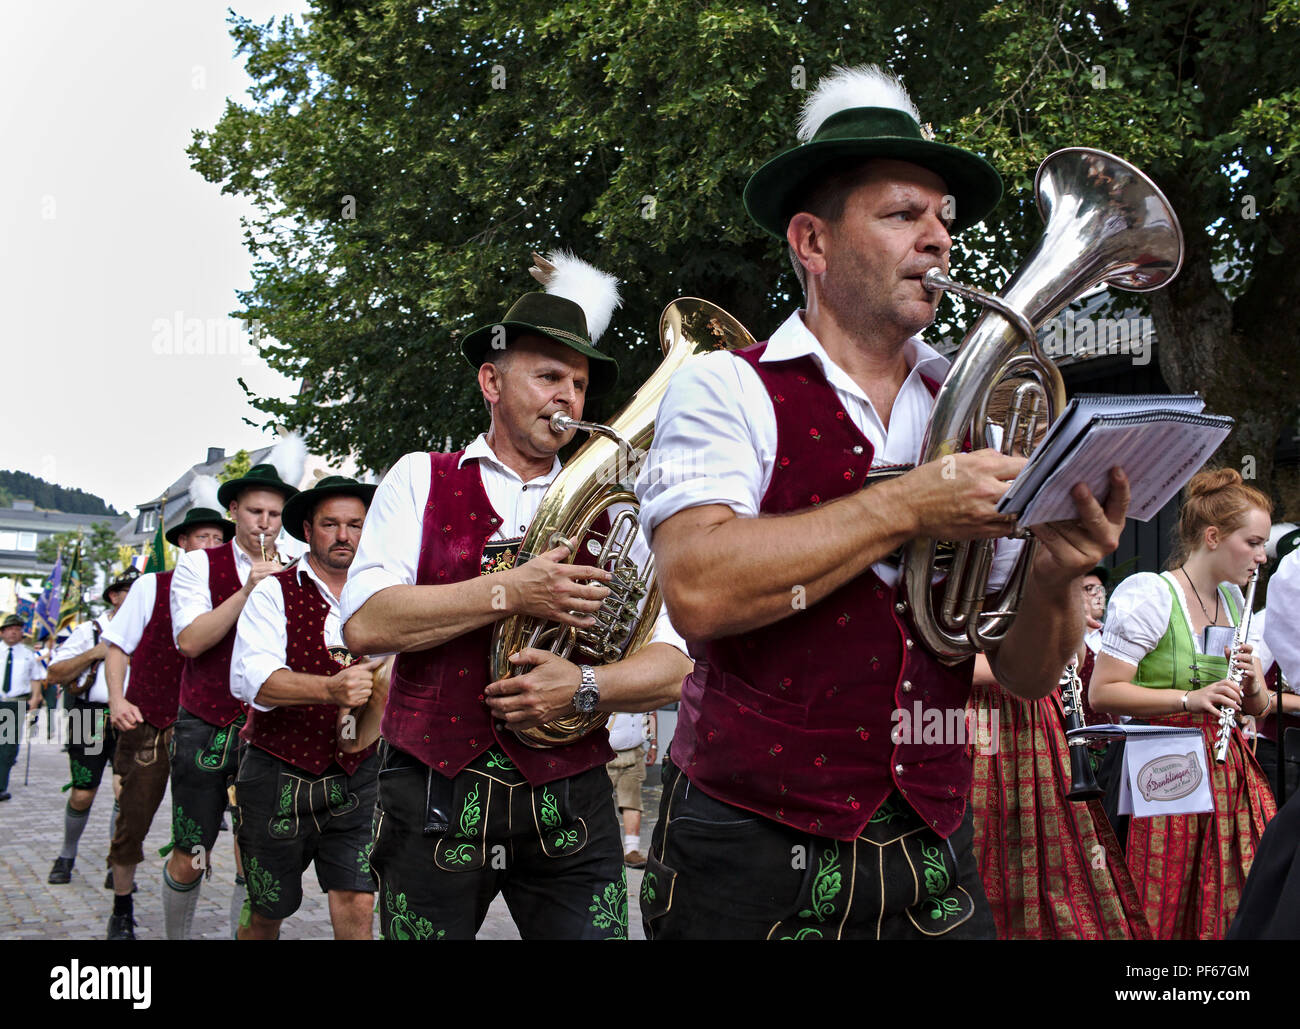 Usseln, Germany - July 30th, 2018 - Bavarian marching band in traditional dress playing brass instruments at a parade Stock Photo